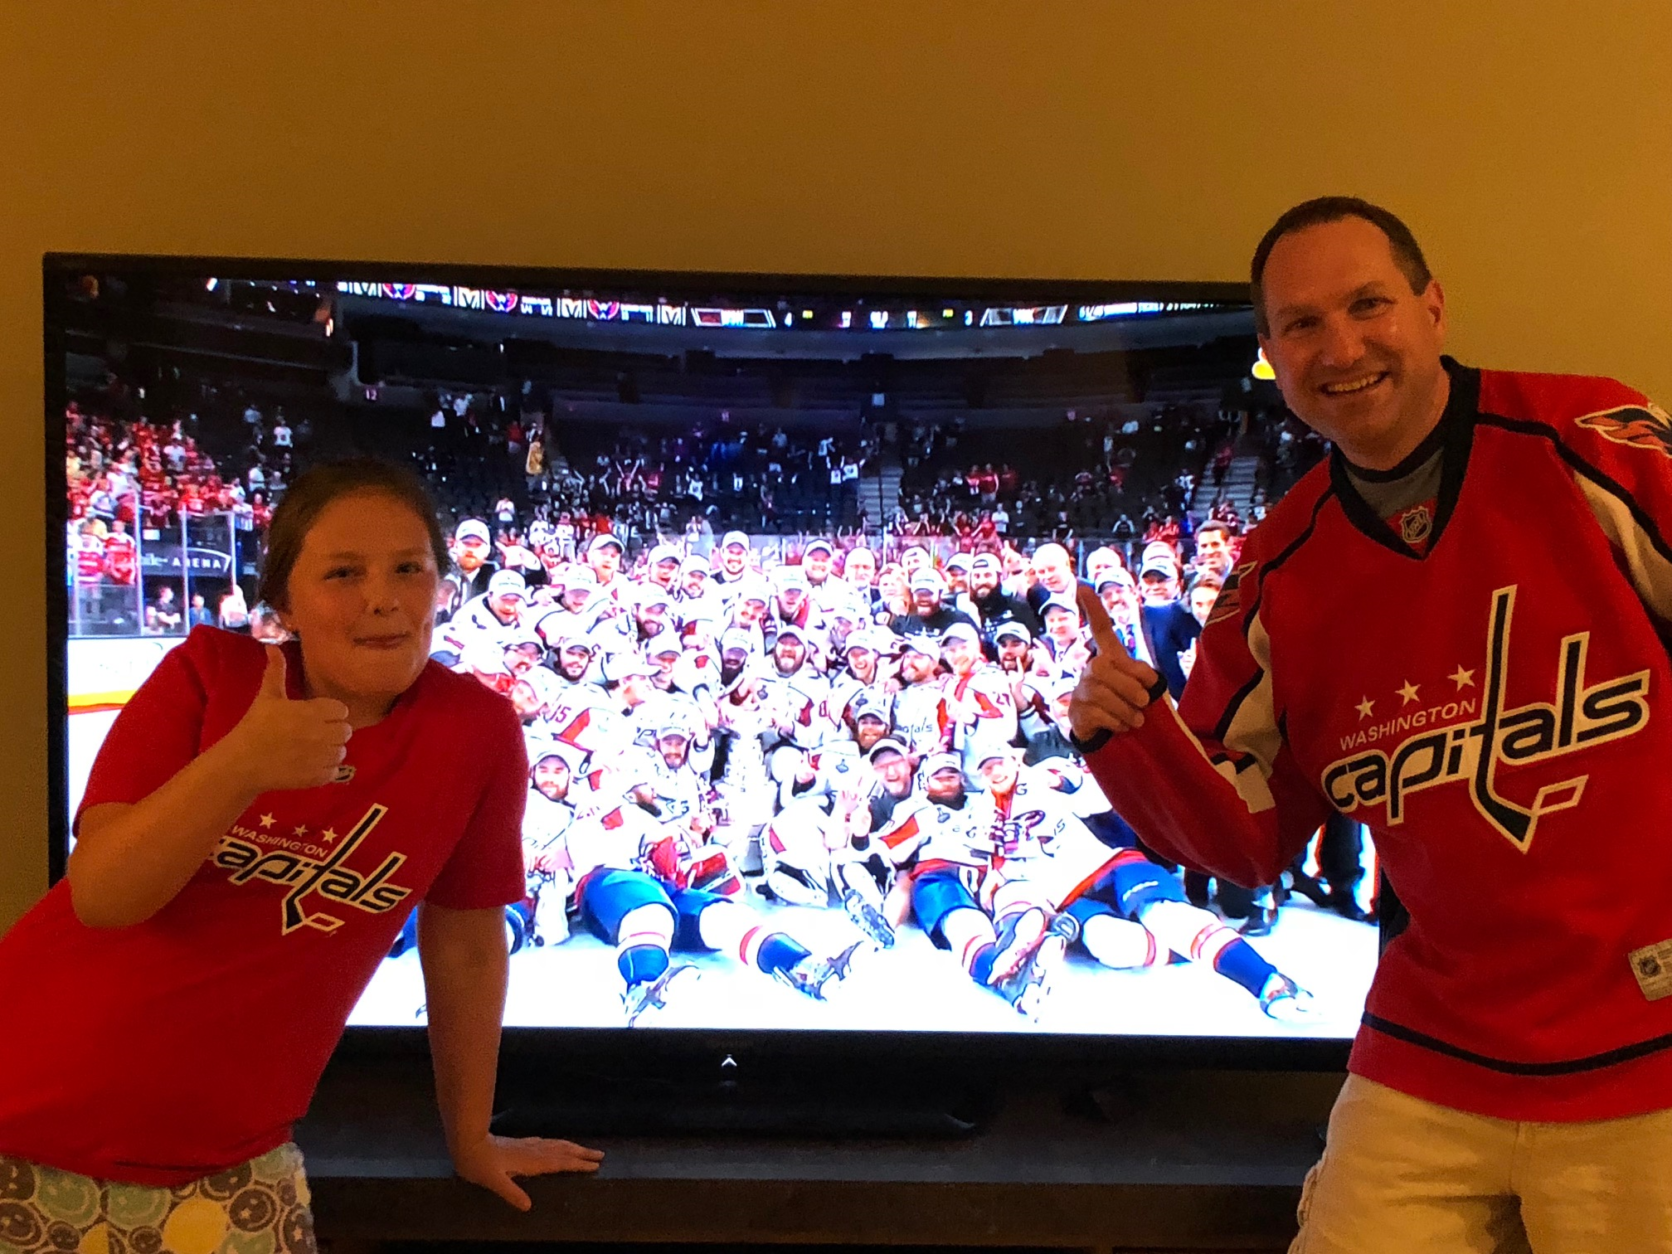 From the comfort of their home, two WTOP listeners join in on the Caps' team photo. (Courtesy WTOP Listeners) 